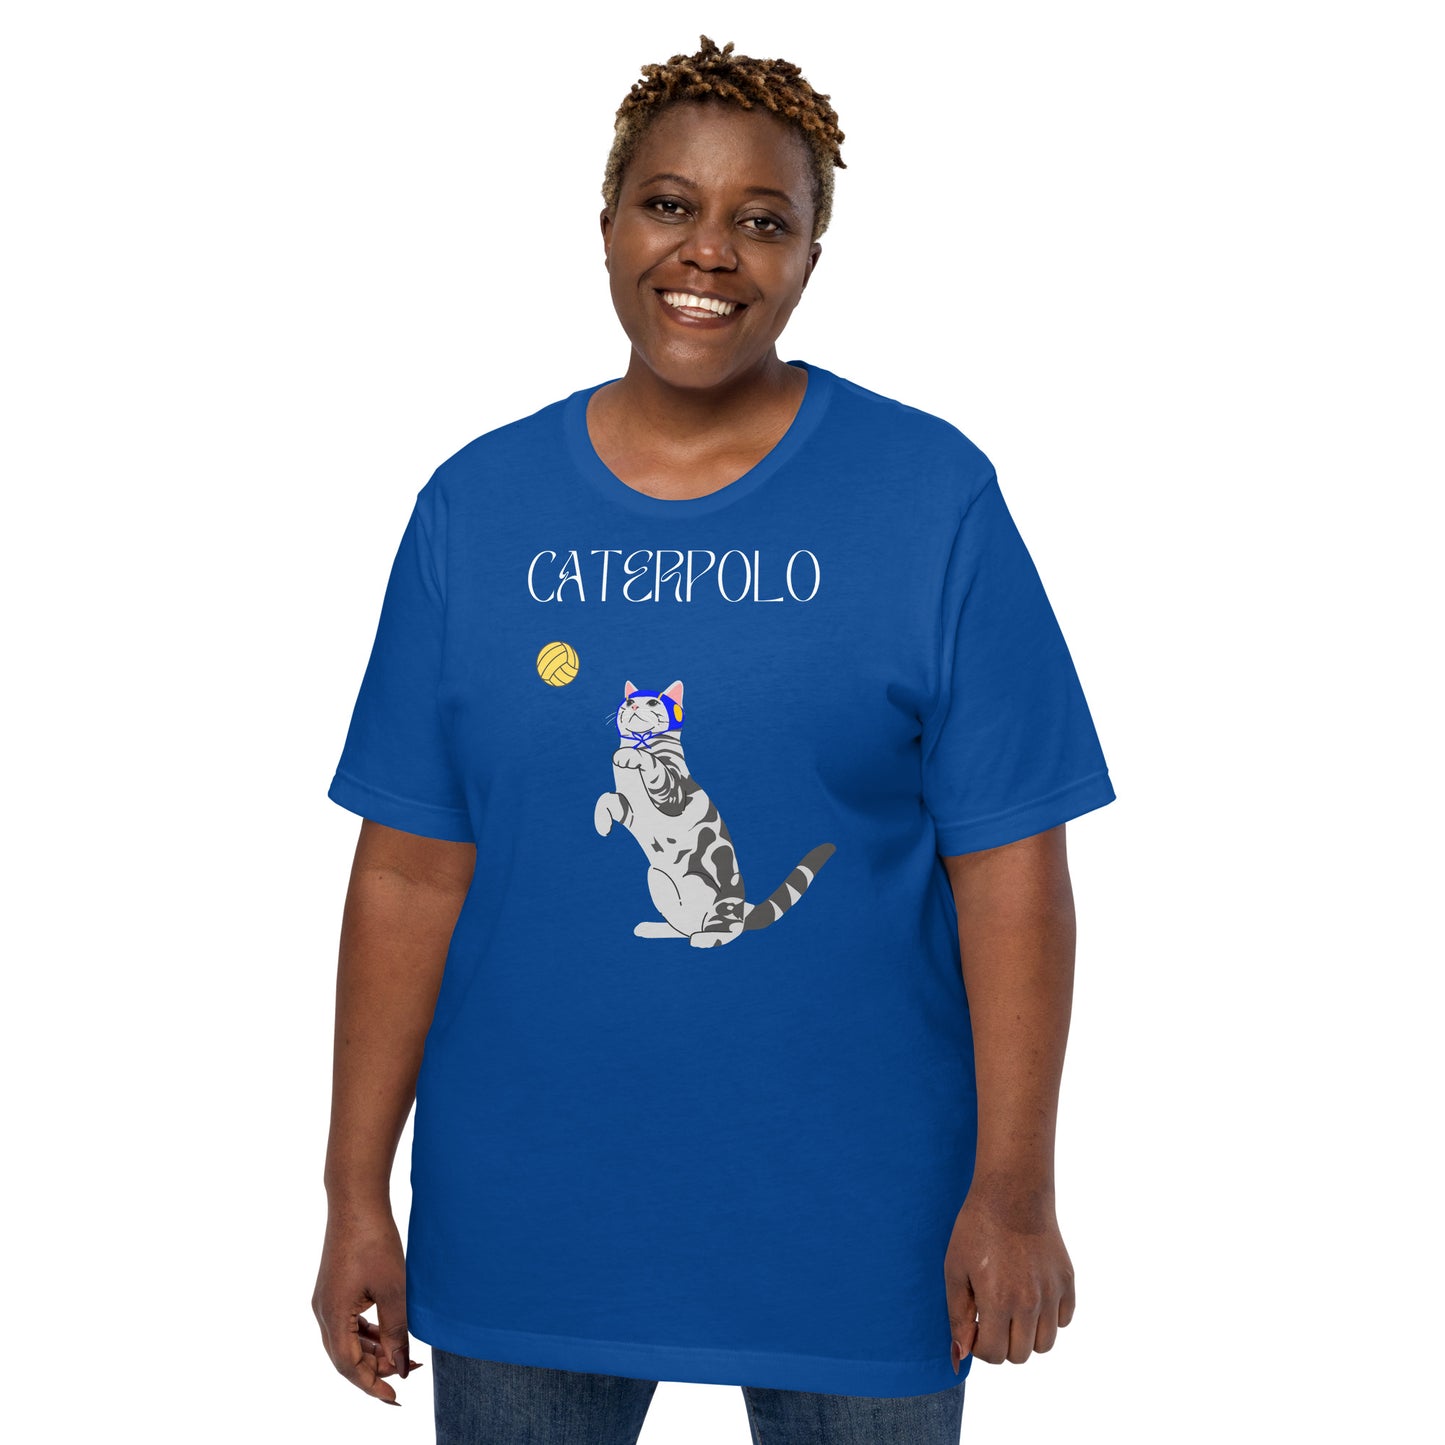 Caterpolo, if cats played waterpolo - Unisex Soft T-shirt - Bella Canvas 3001